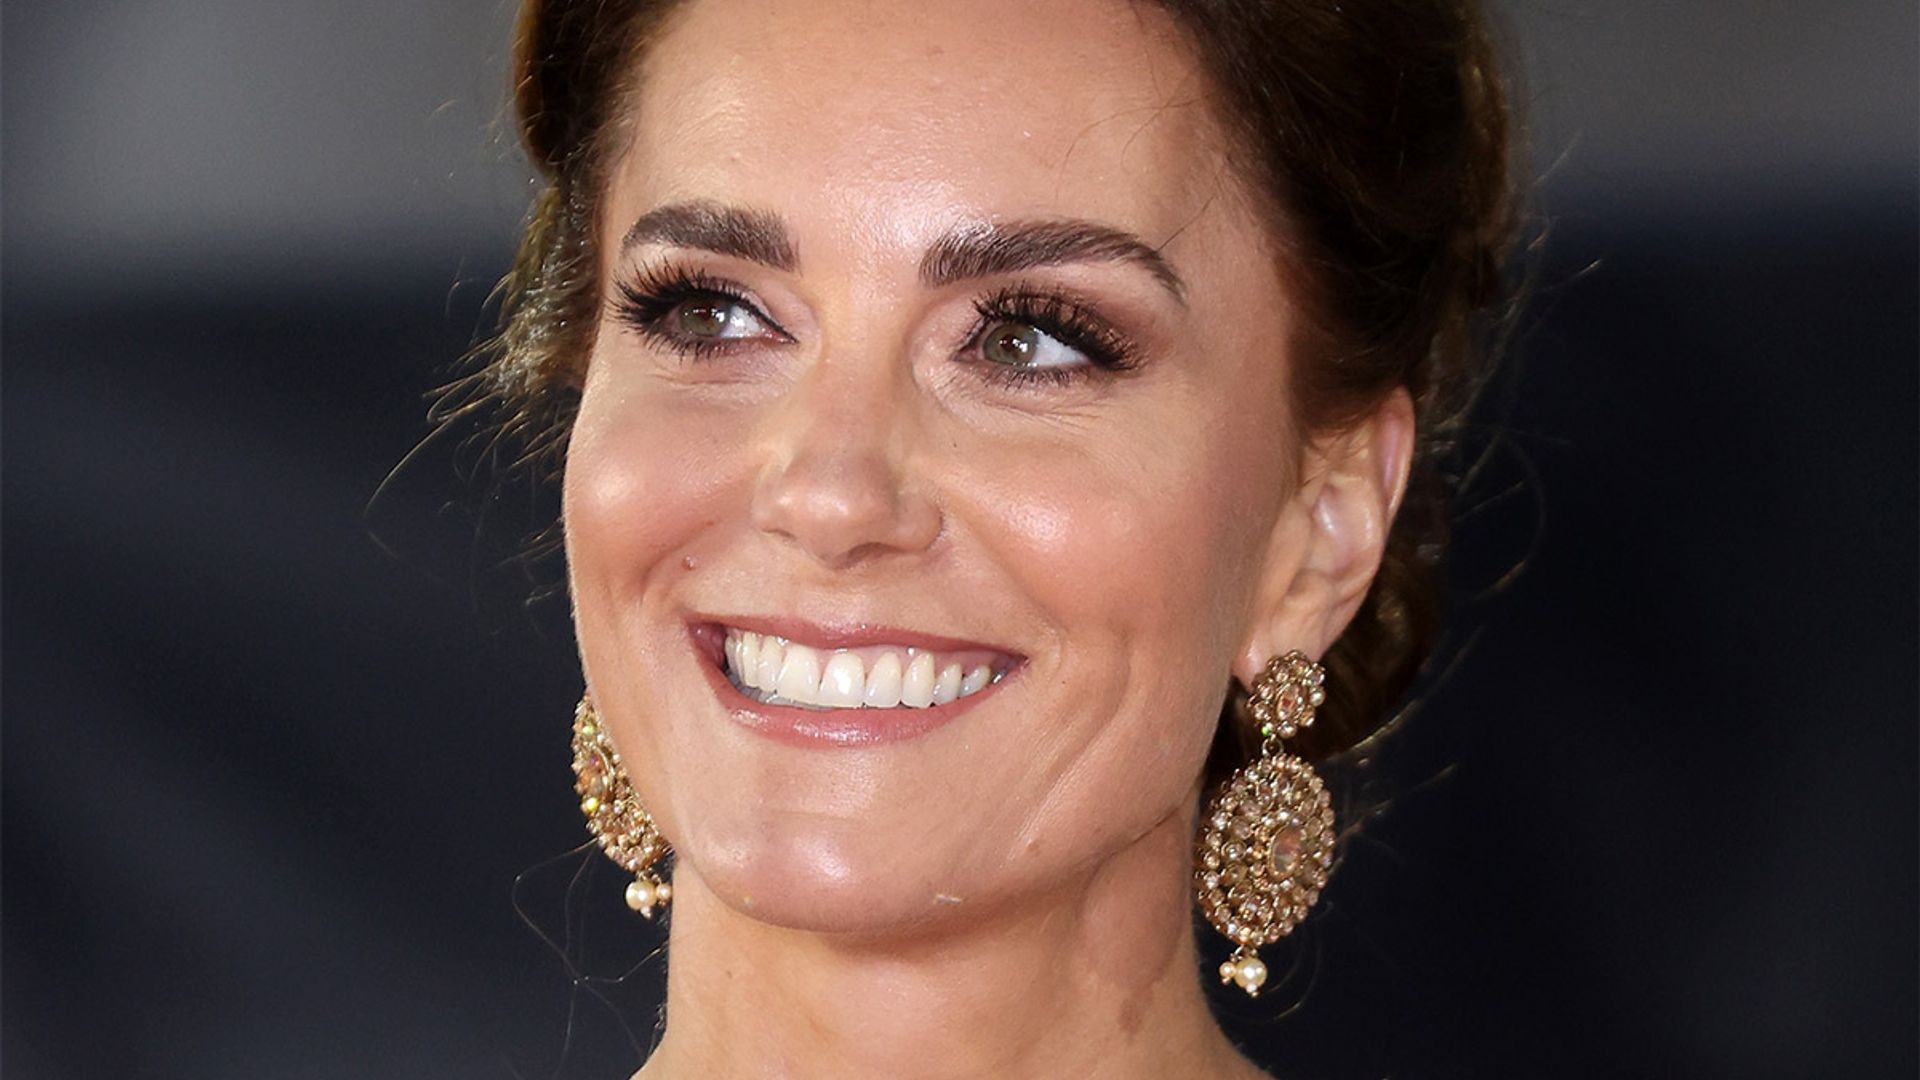 Kate Middleton's Christmas party outfit revealed - and it's a sequin ...